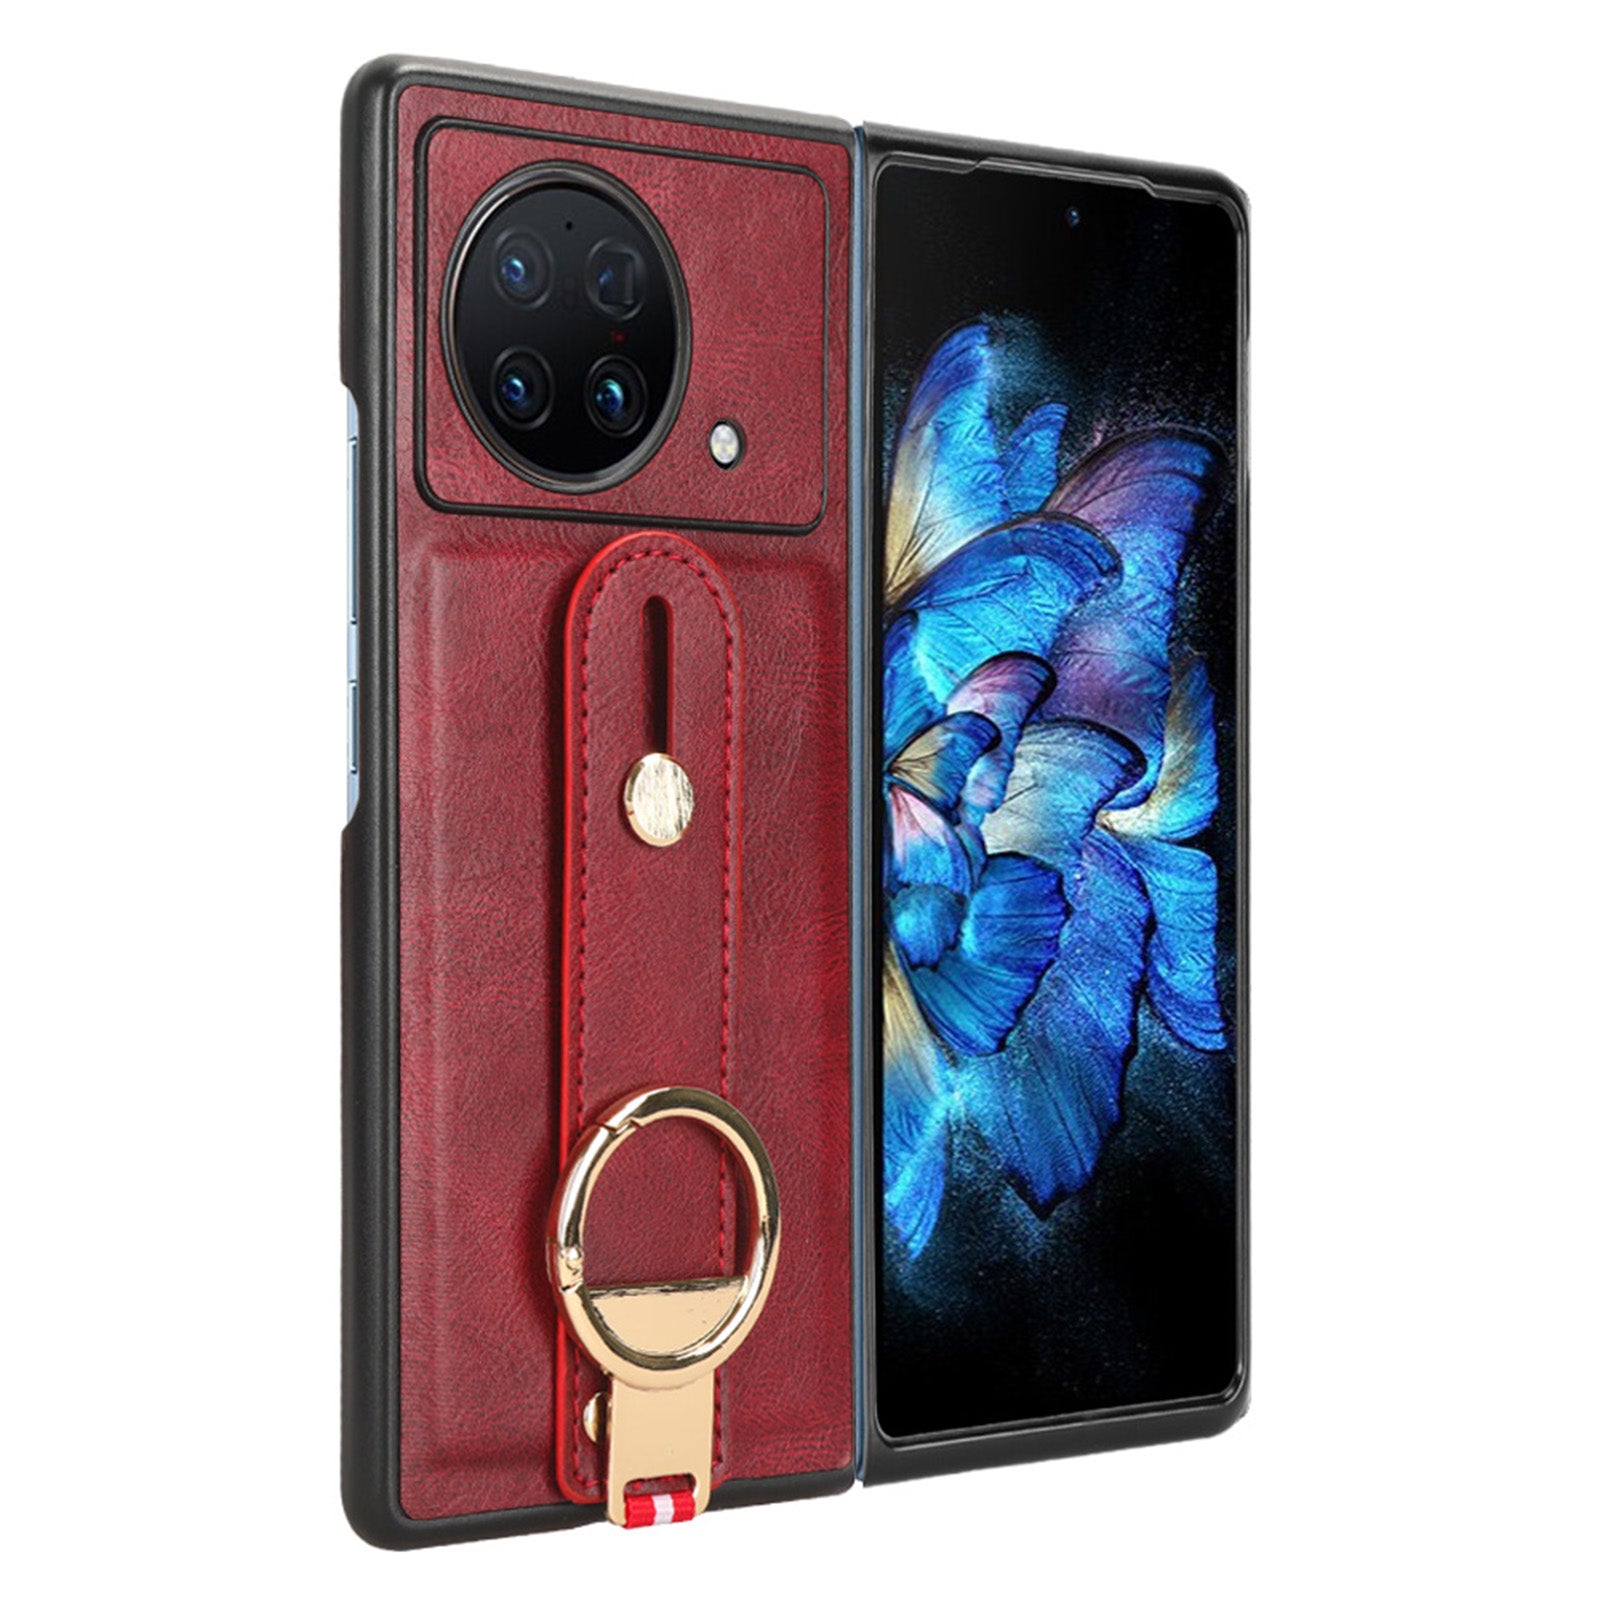 Wristband Phone Cover for vivo X Fold , Leather Coating PC+TPU Case with Neck Strap - Red